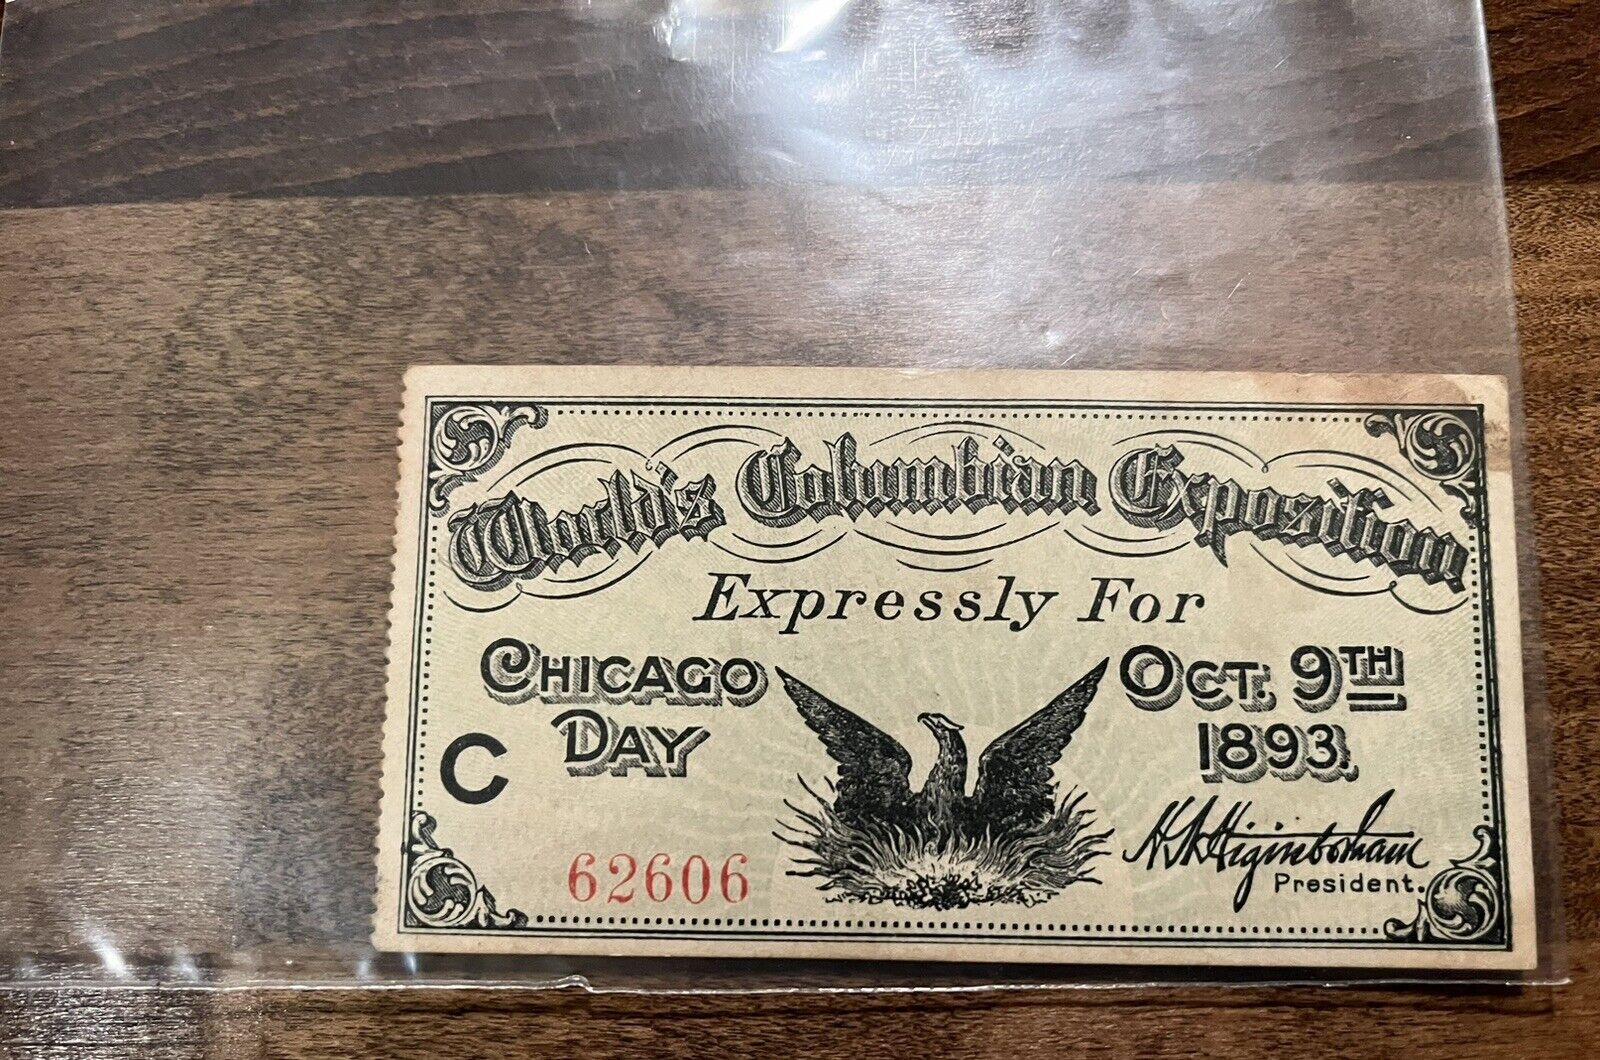 1893 Chicago World's Columbian Exposition Chicago Day Ticket